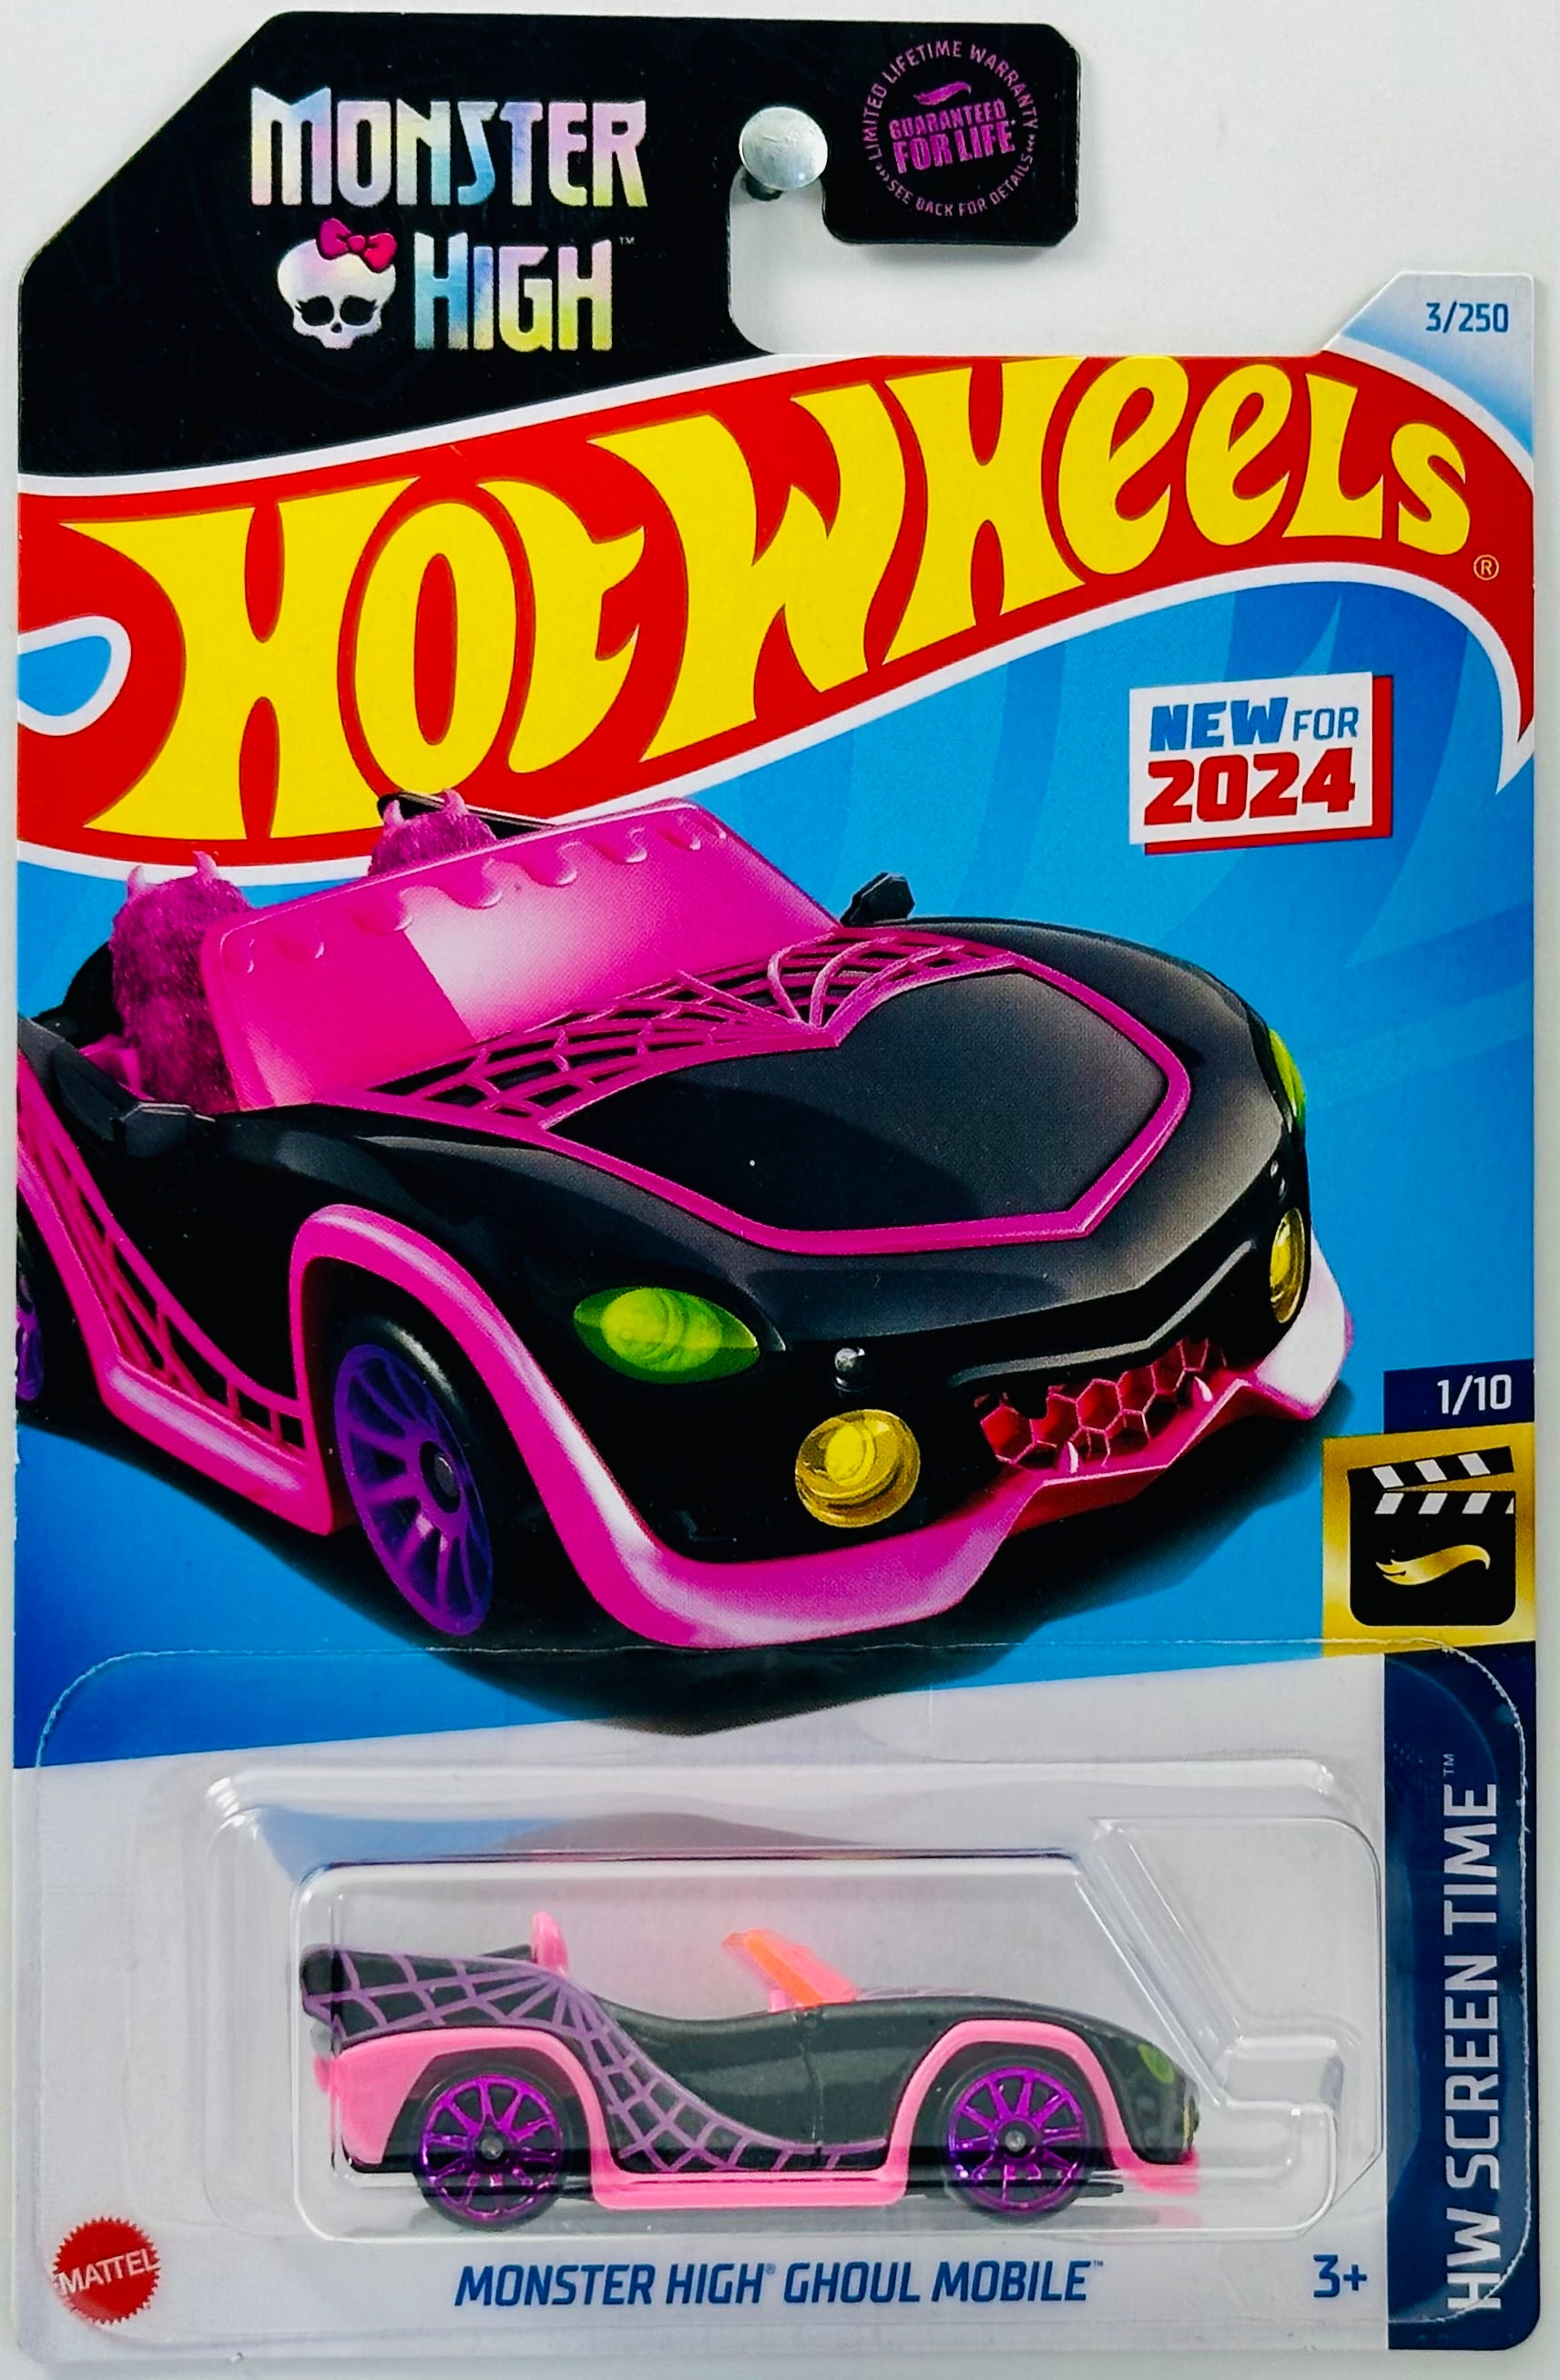 Hot Wheels 2024 - Collector # 003/250 - HW Screen Time 01/10 - New Models -  Monster High Ghoul Mobile - Black - Pink Spider Web - USA 'Monster High' 